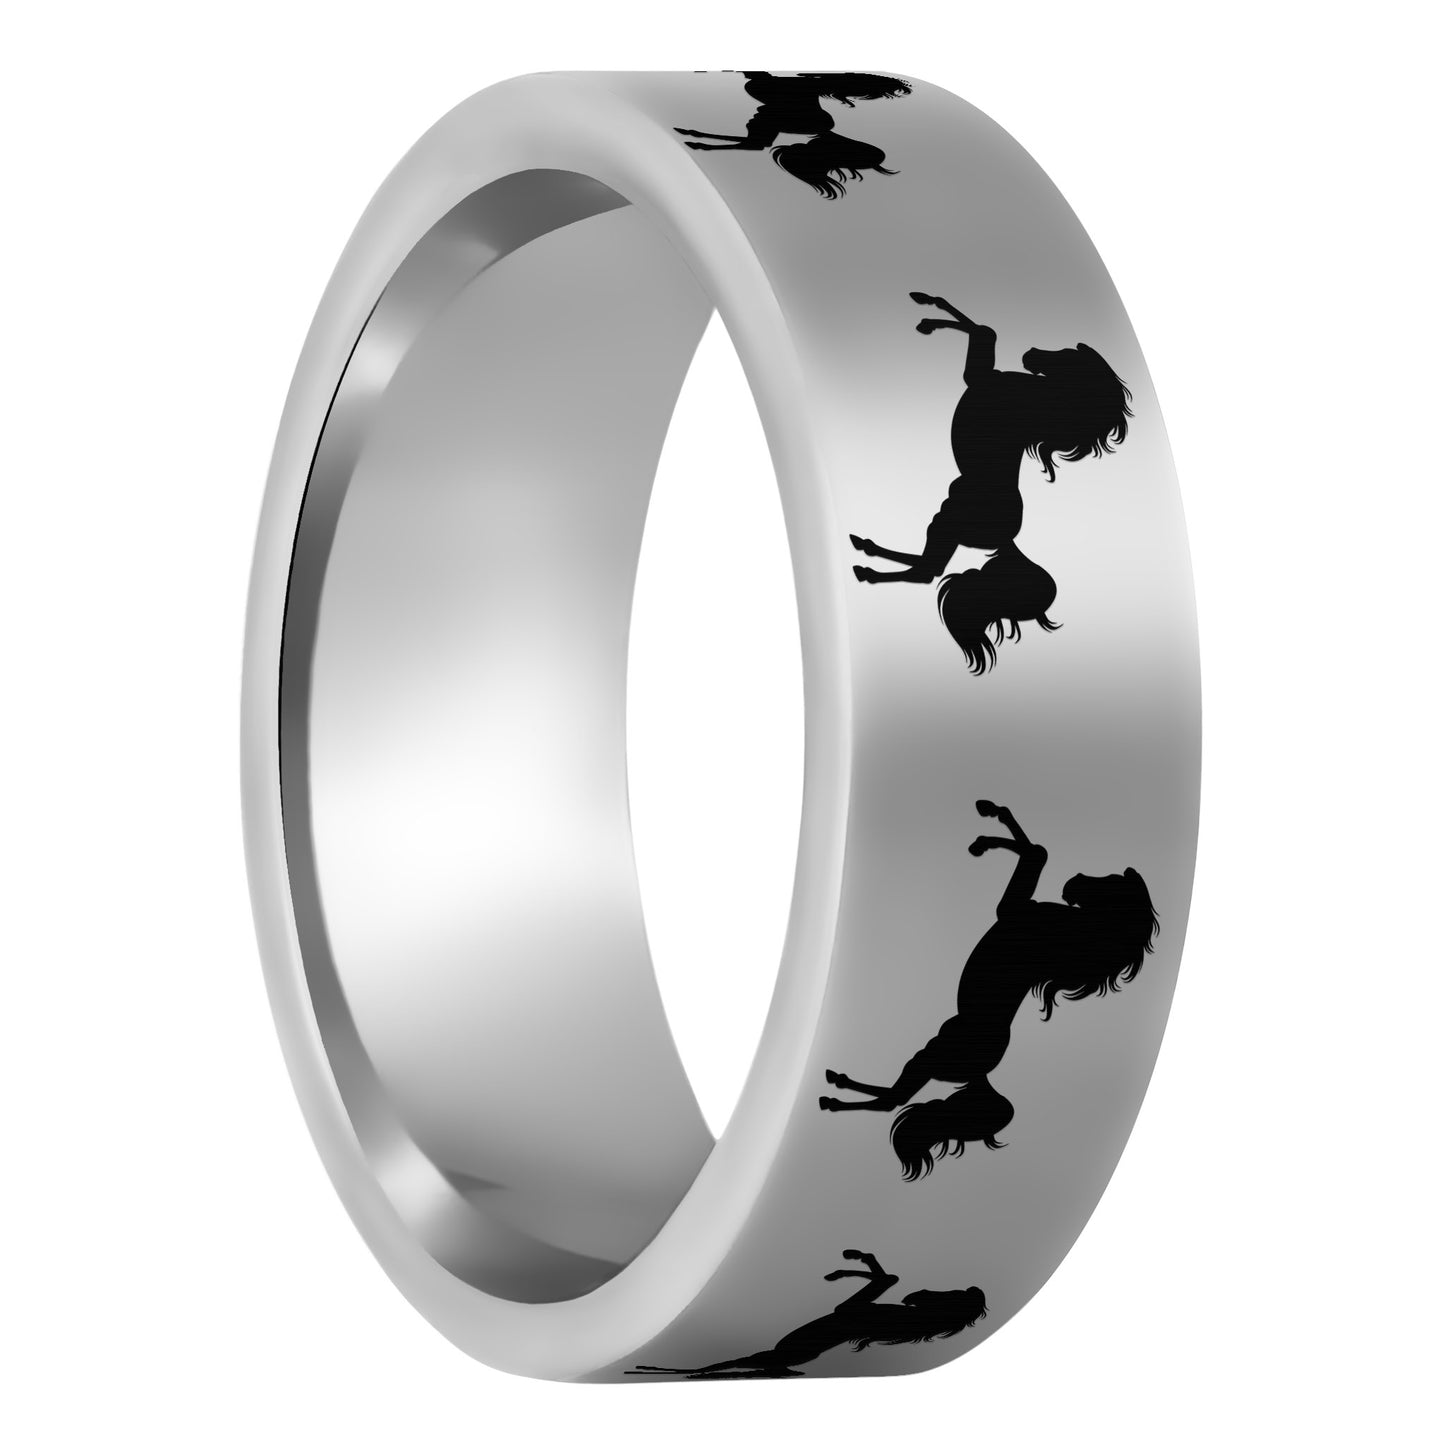 One Rearing Horse Tungsten Men's Wedding Band displayed on a plain white background